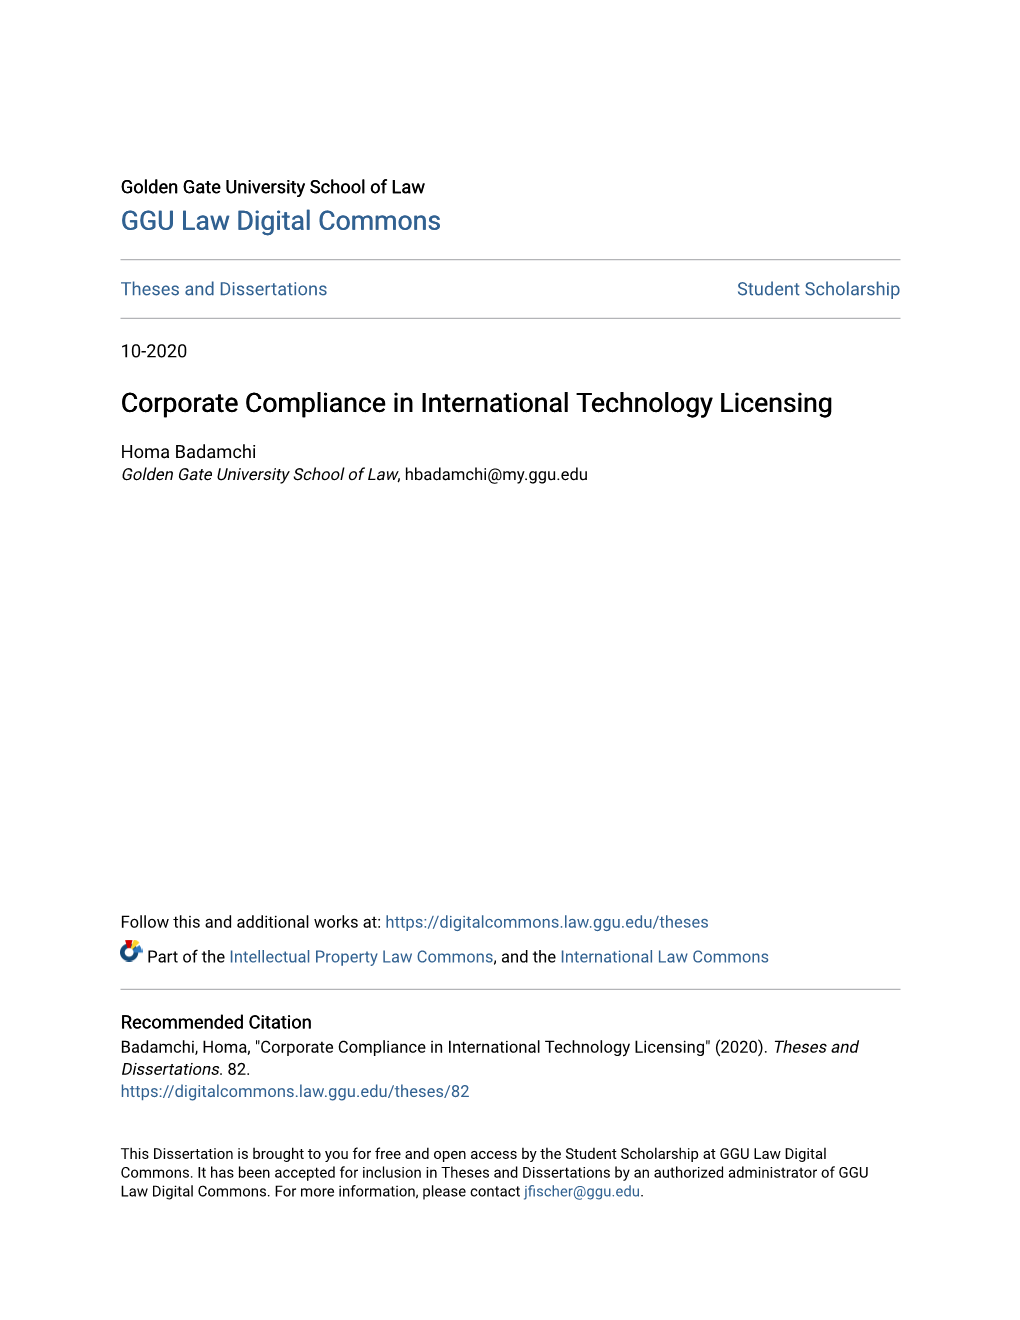 Corporate Compliance in International Technology Licensing